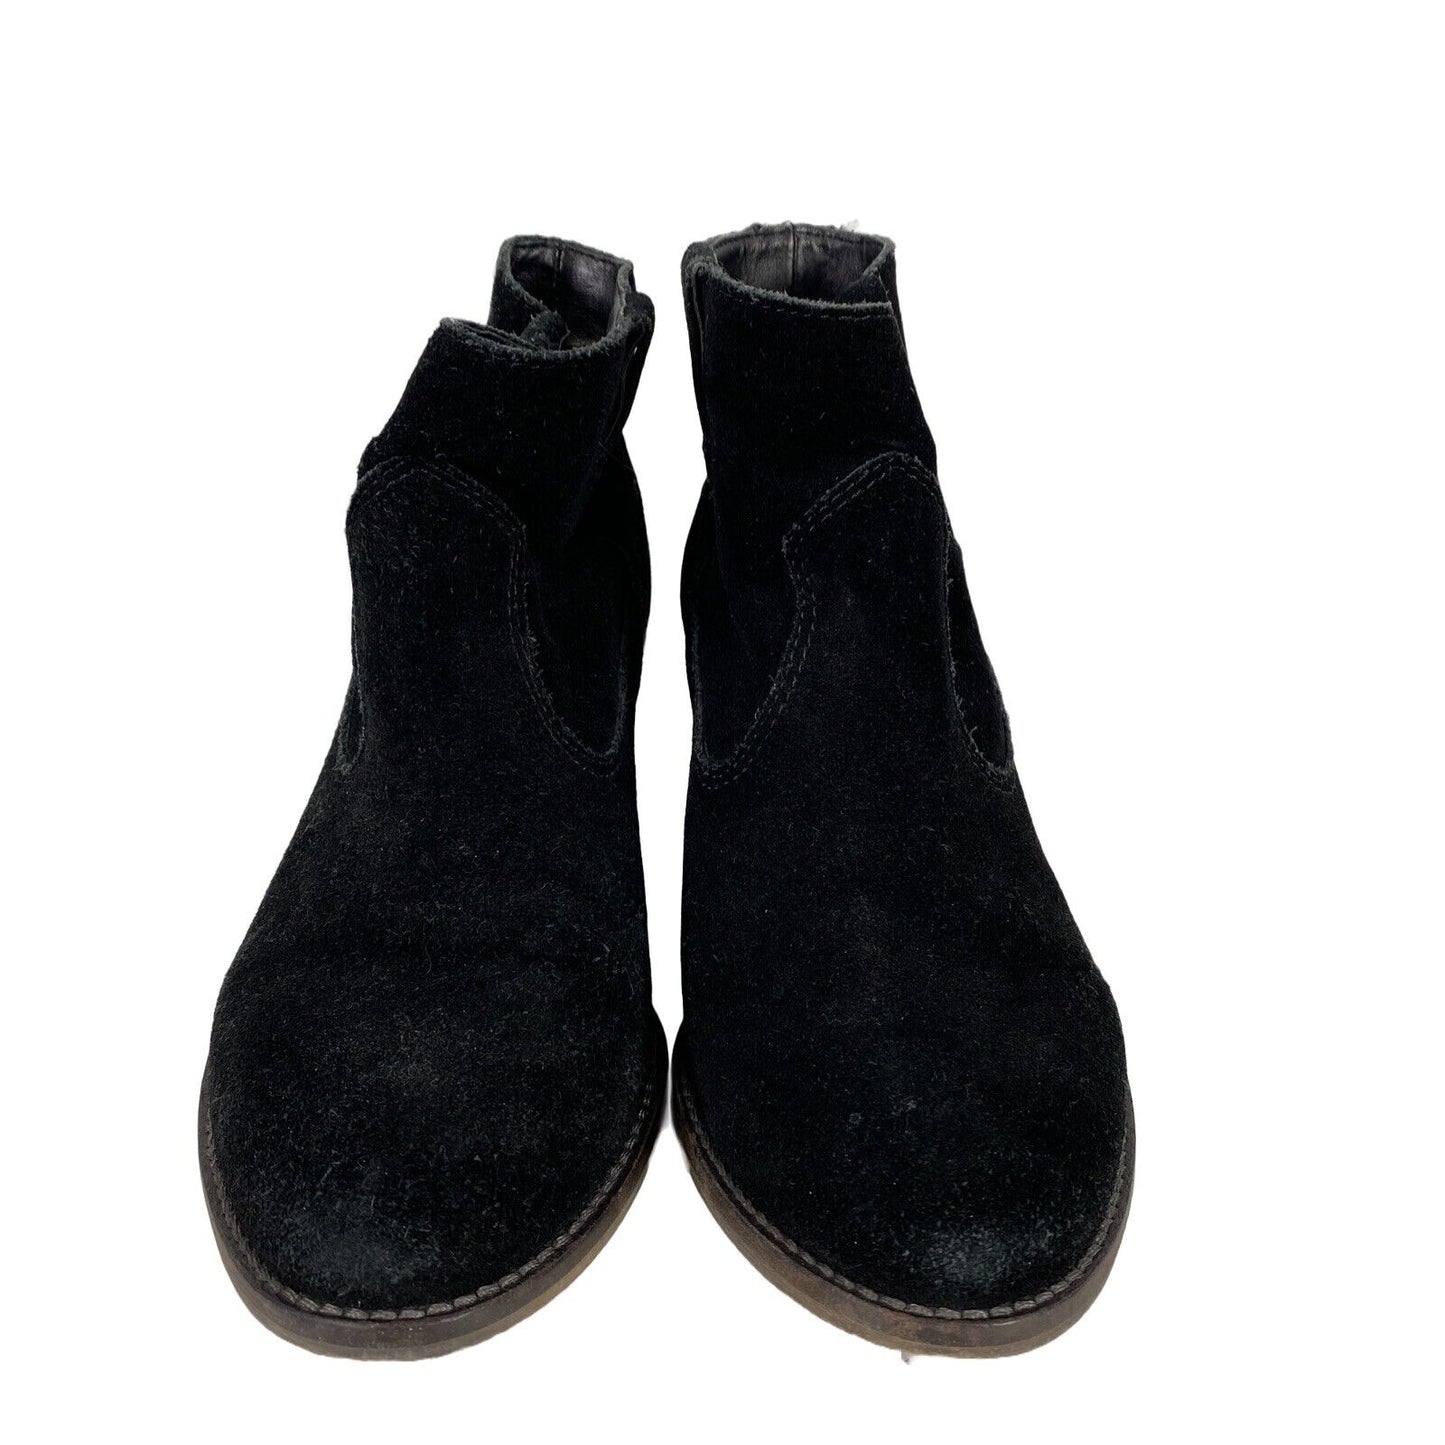 Dolce Vita Women's Black Suede Pull On Ankle Booties - 6.5